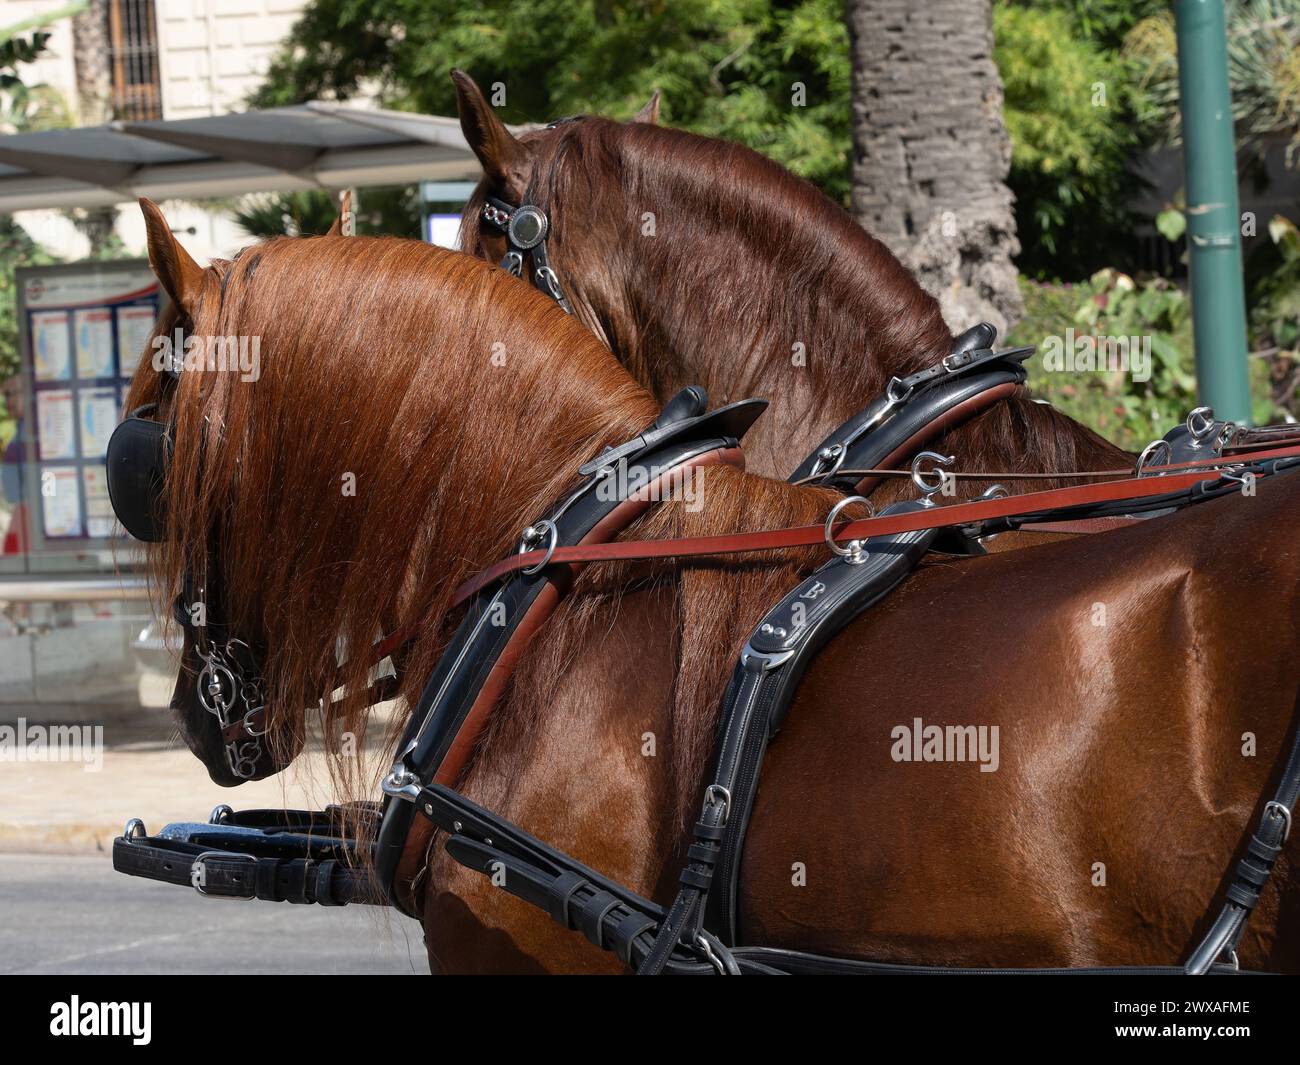 Horses with saddlery details for carriage horses at the Málaga Fair Stock Photo